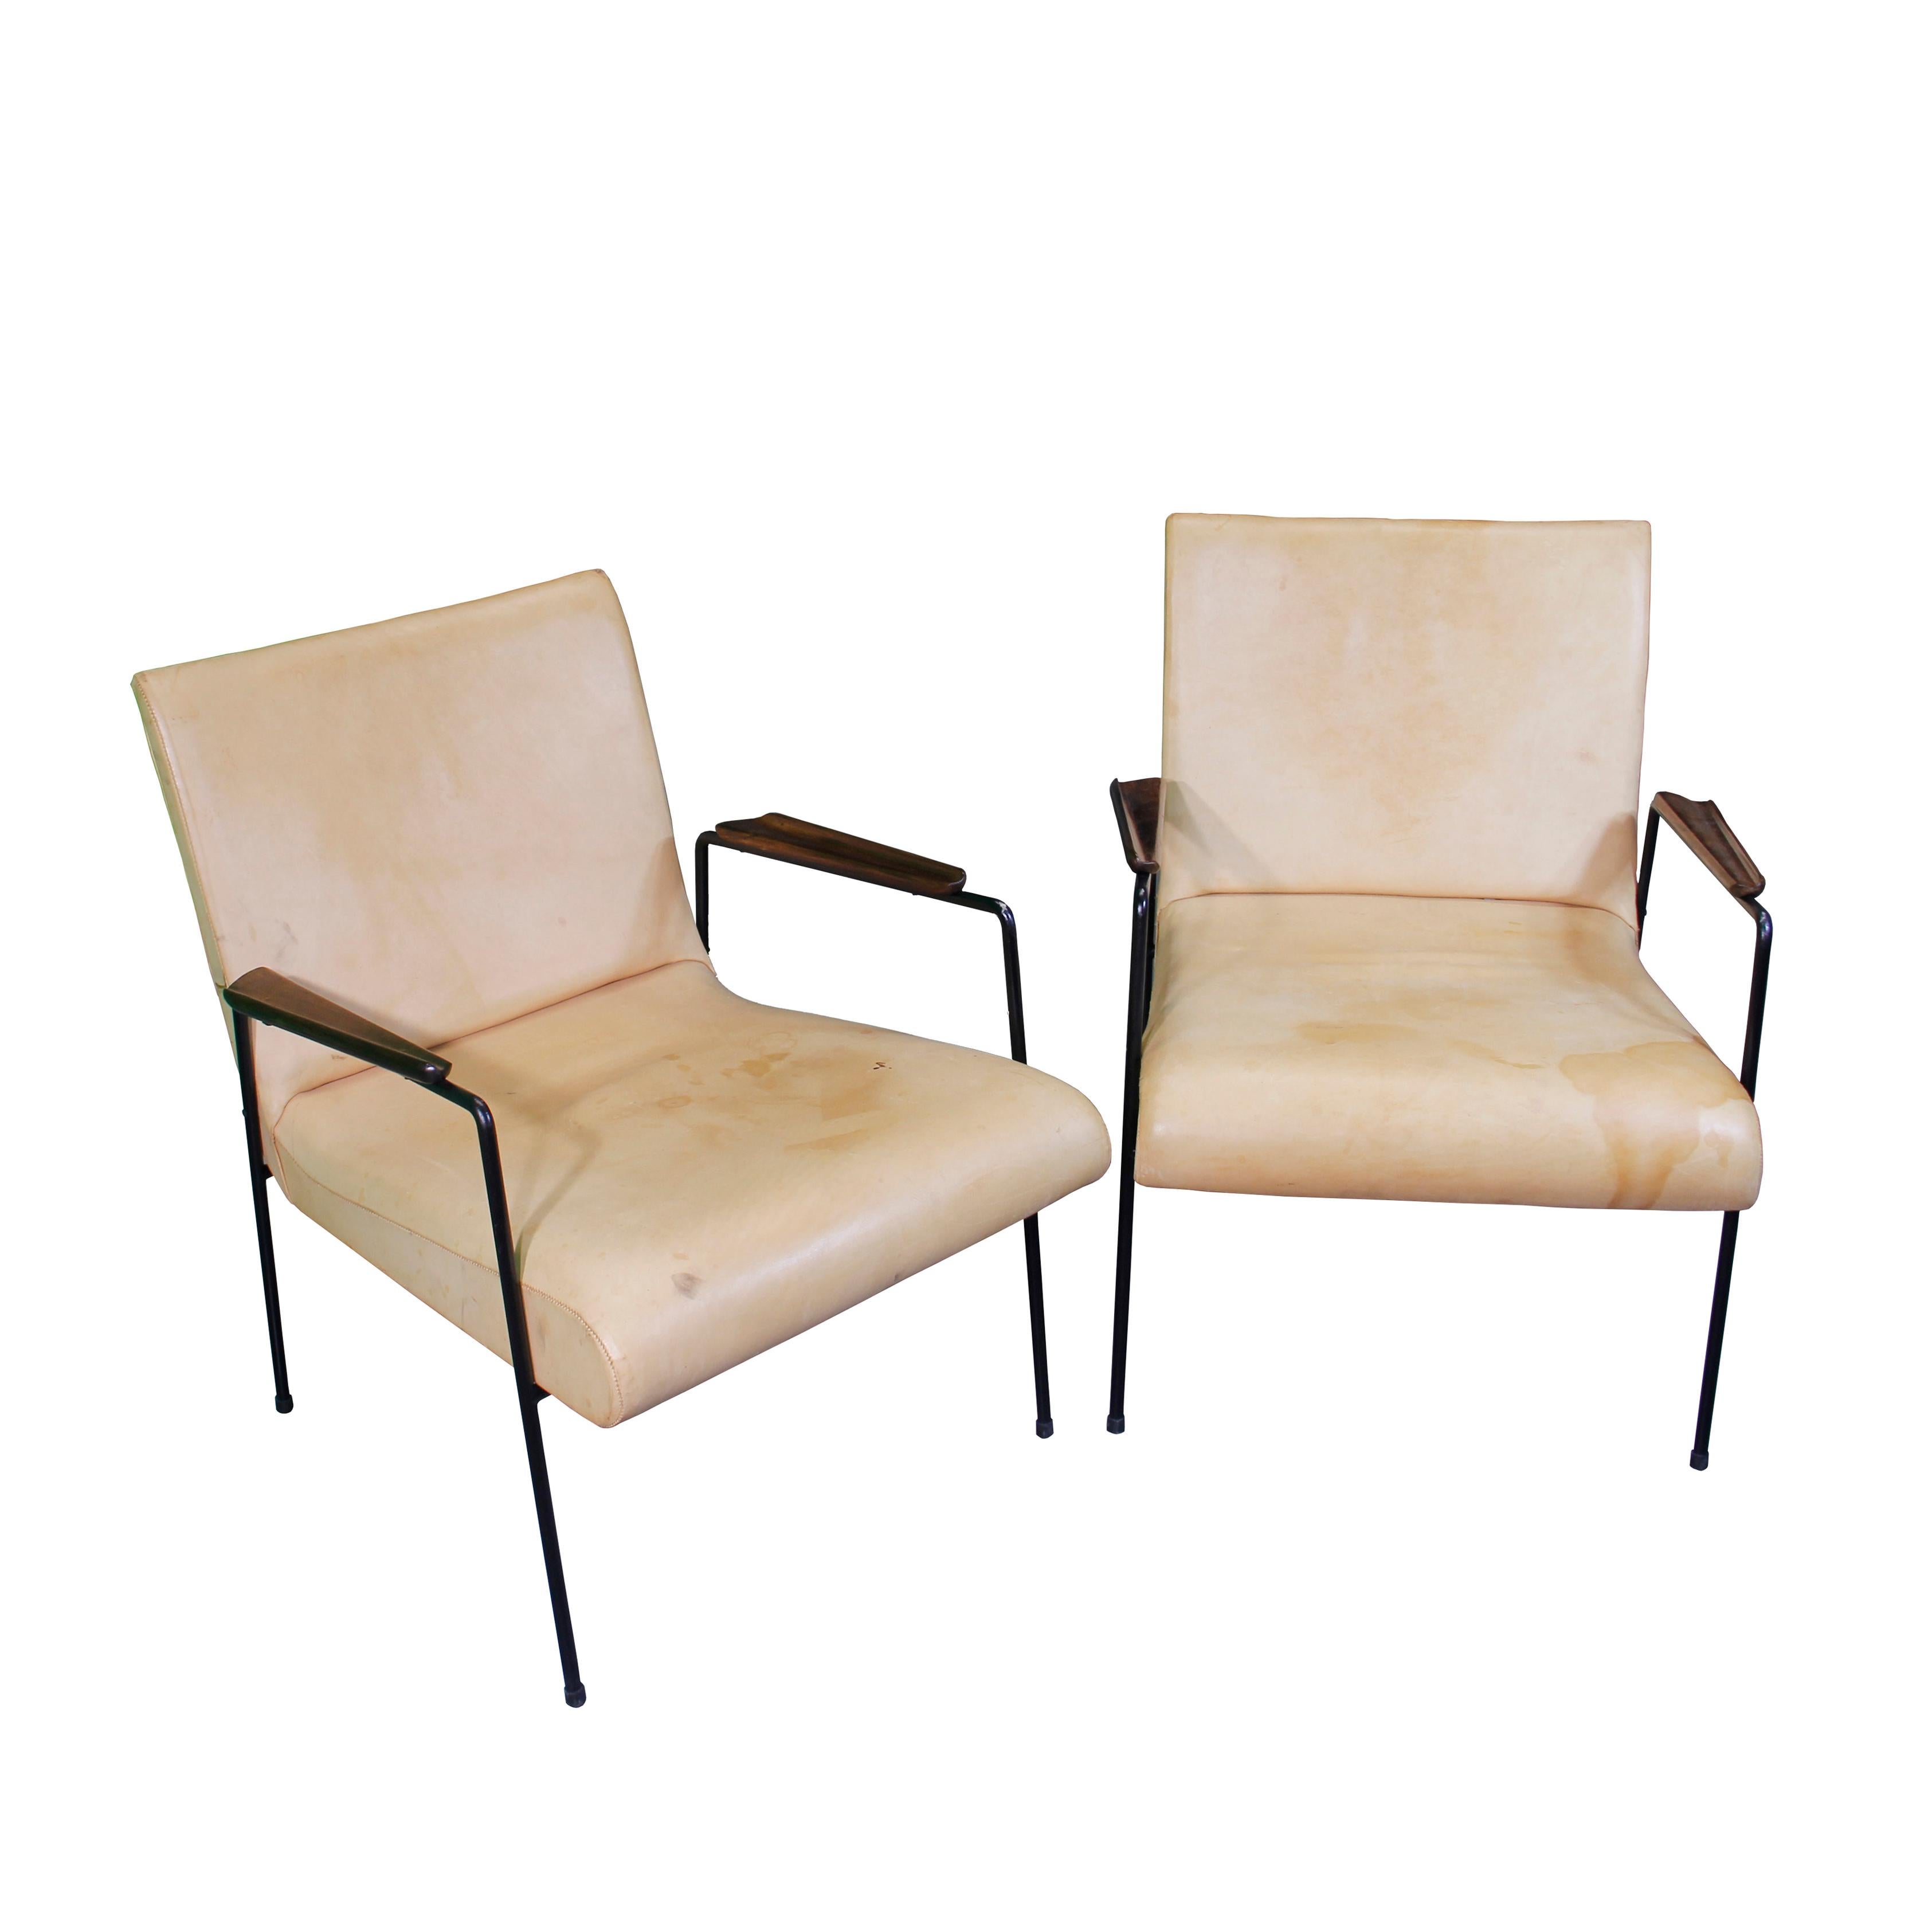 Joaquim Tenreiro, leve armchairs (light) - 1960s. Metal version. Manufactured by Tenreiro Móveis e Decorações. Metal frame, armrests in Jacarandá. Metal shows signs of age but otherwise is in great condition. 
We kept the chairs in their original